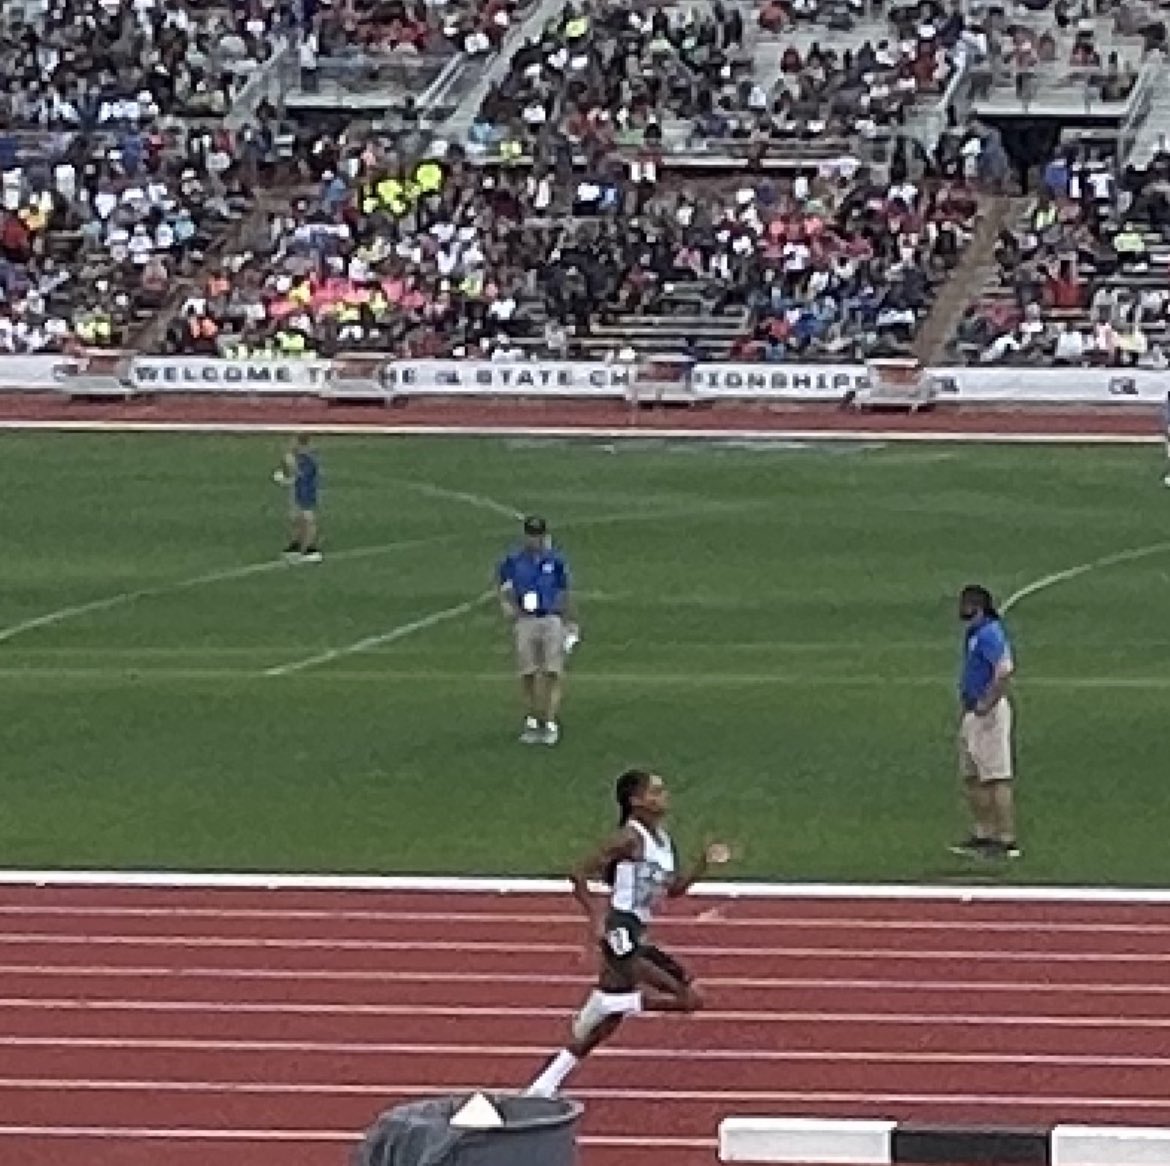 Congratulations Lauren Lewis! Way to crush the state meet record in the 400M with a time of 51.45 & earning that gold medal We are so proud of you! #statechamp @PISD_Athletics @ProsperISD @ProsperHS @UTexas35